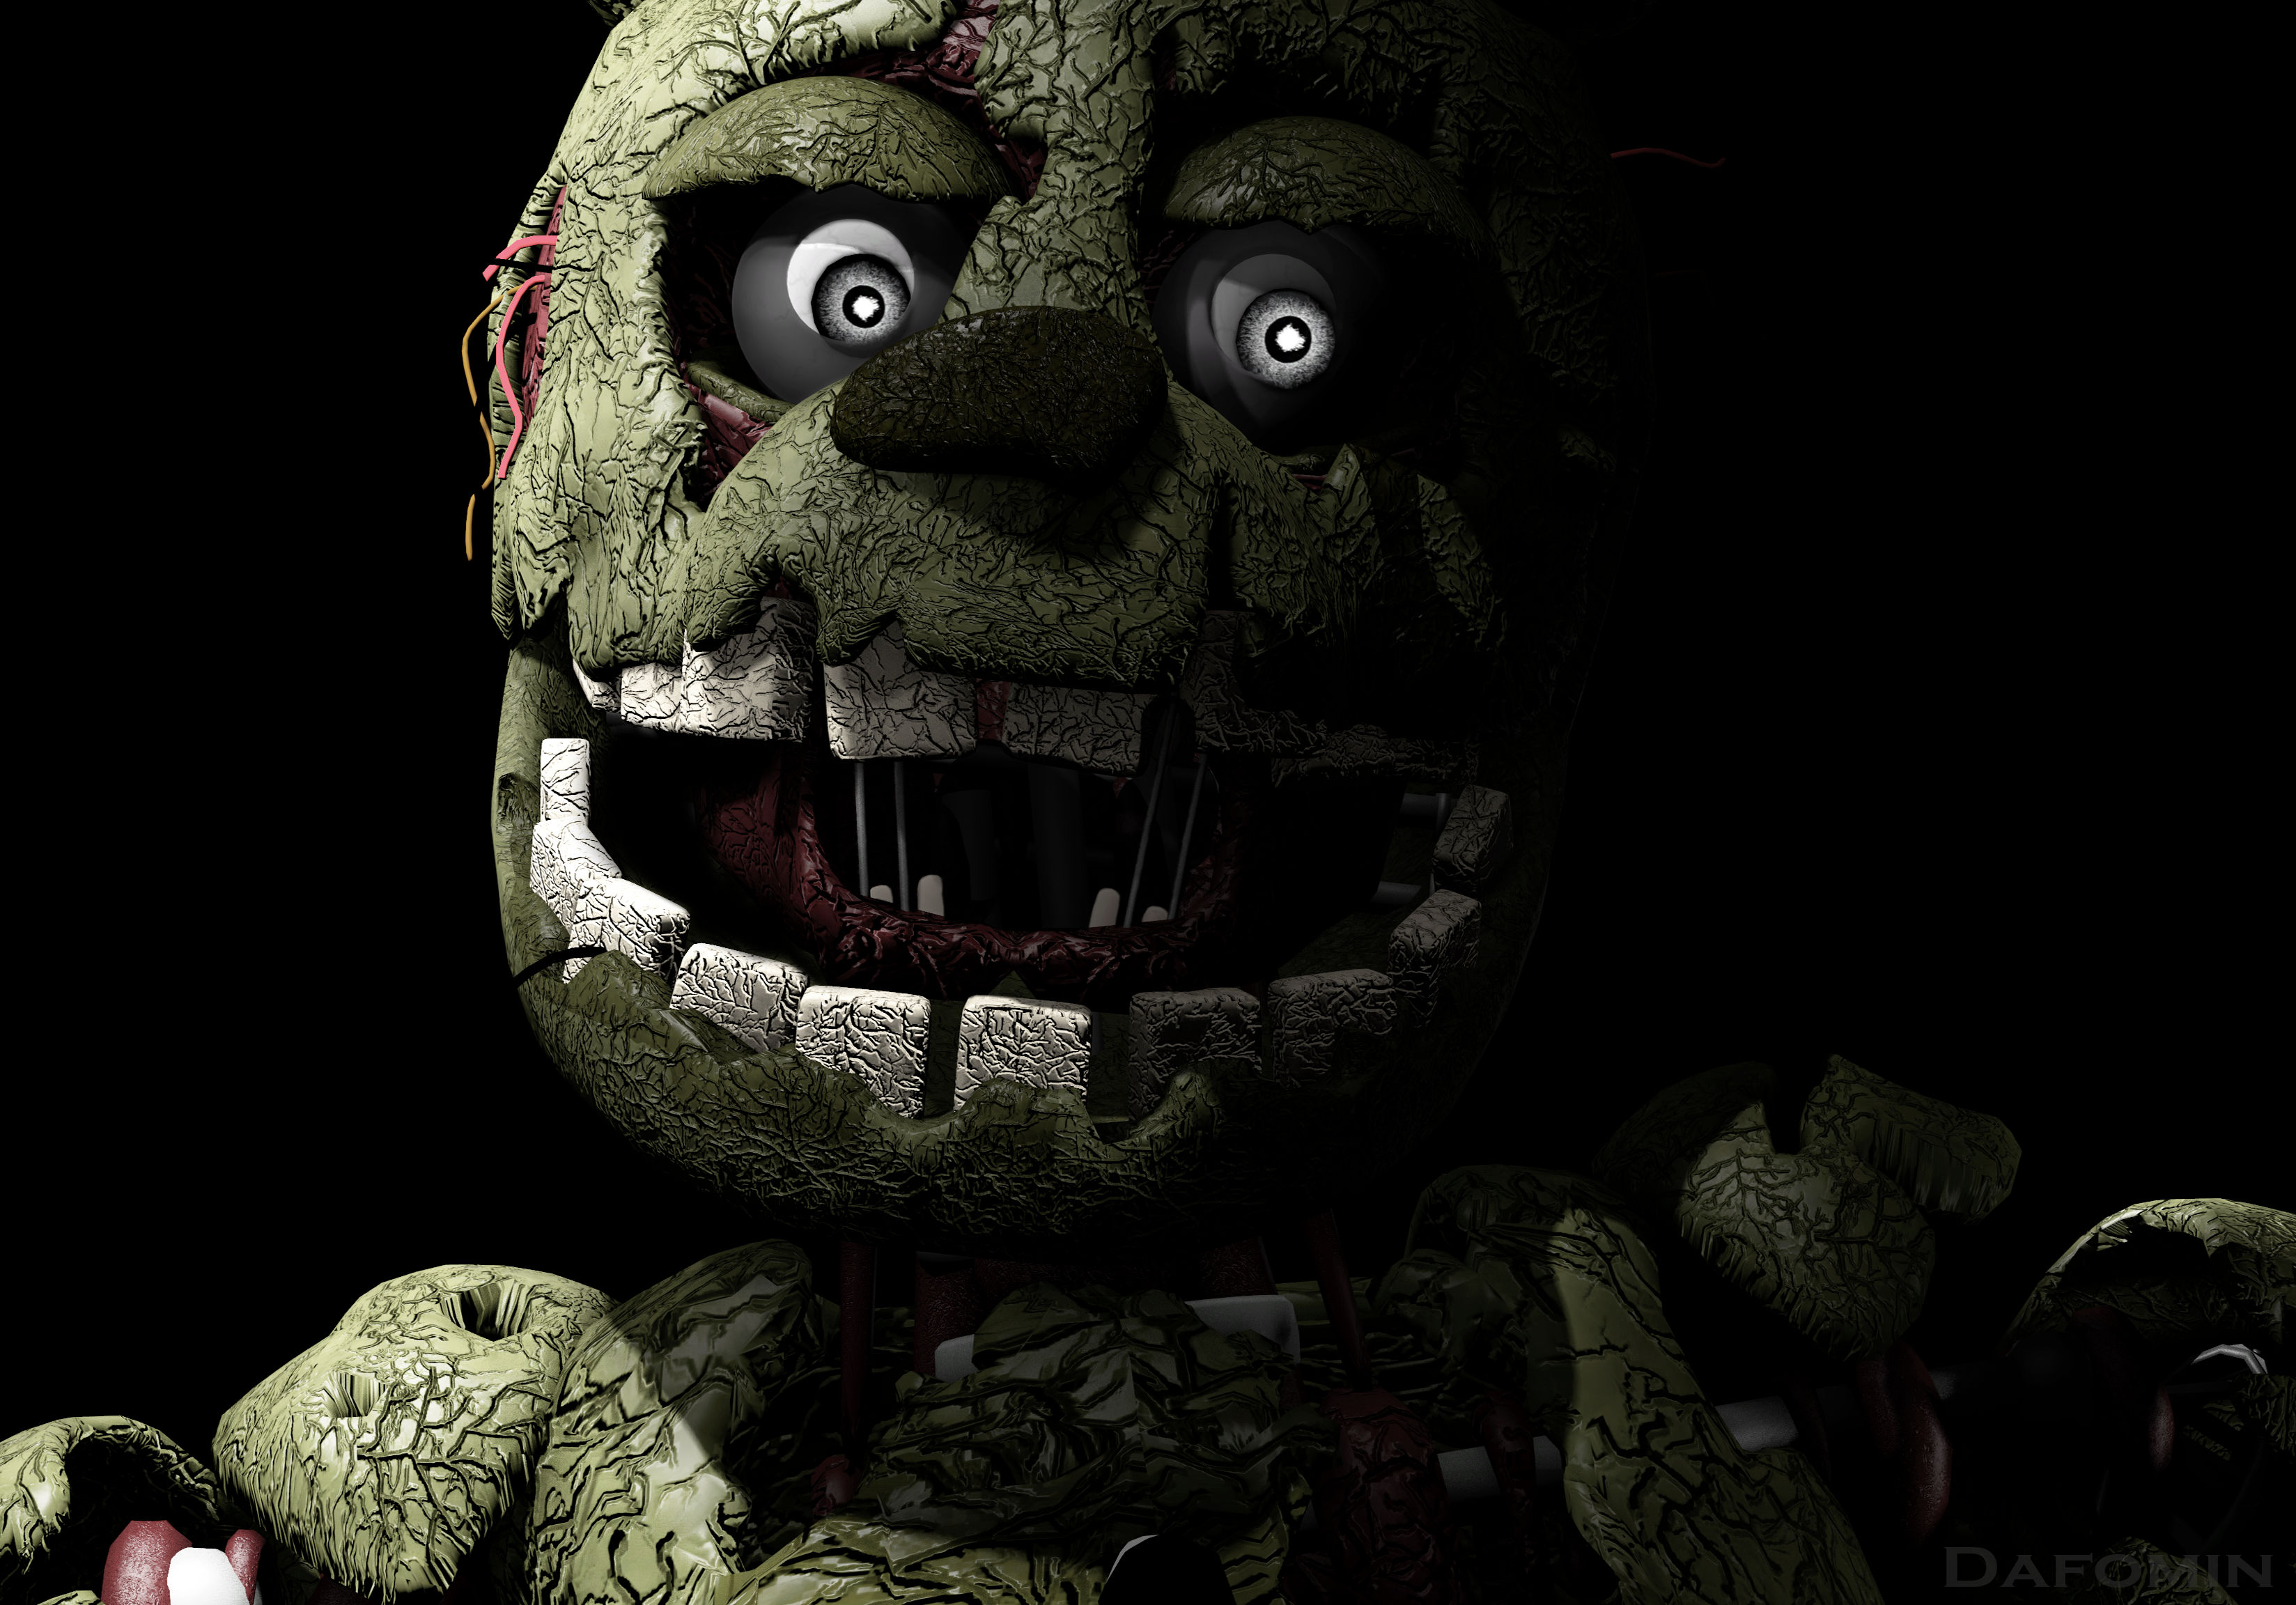 Video Game Five Nights At Freddy 039 S 3 3296x2304